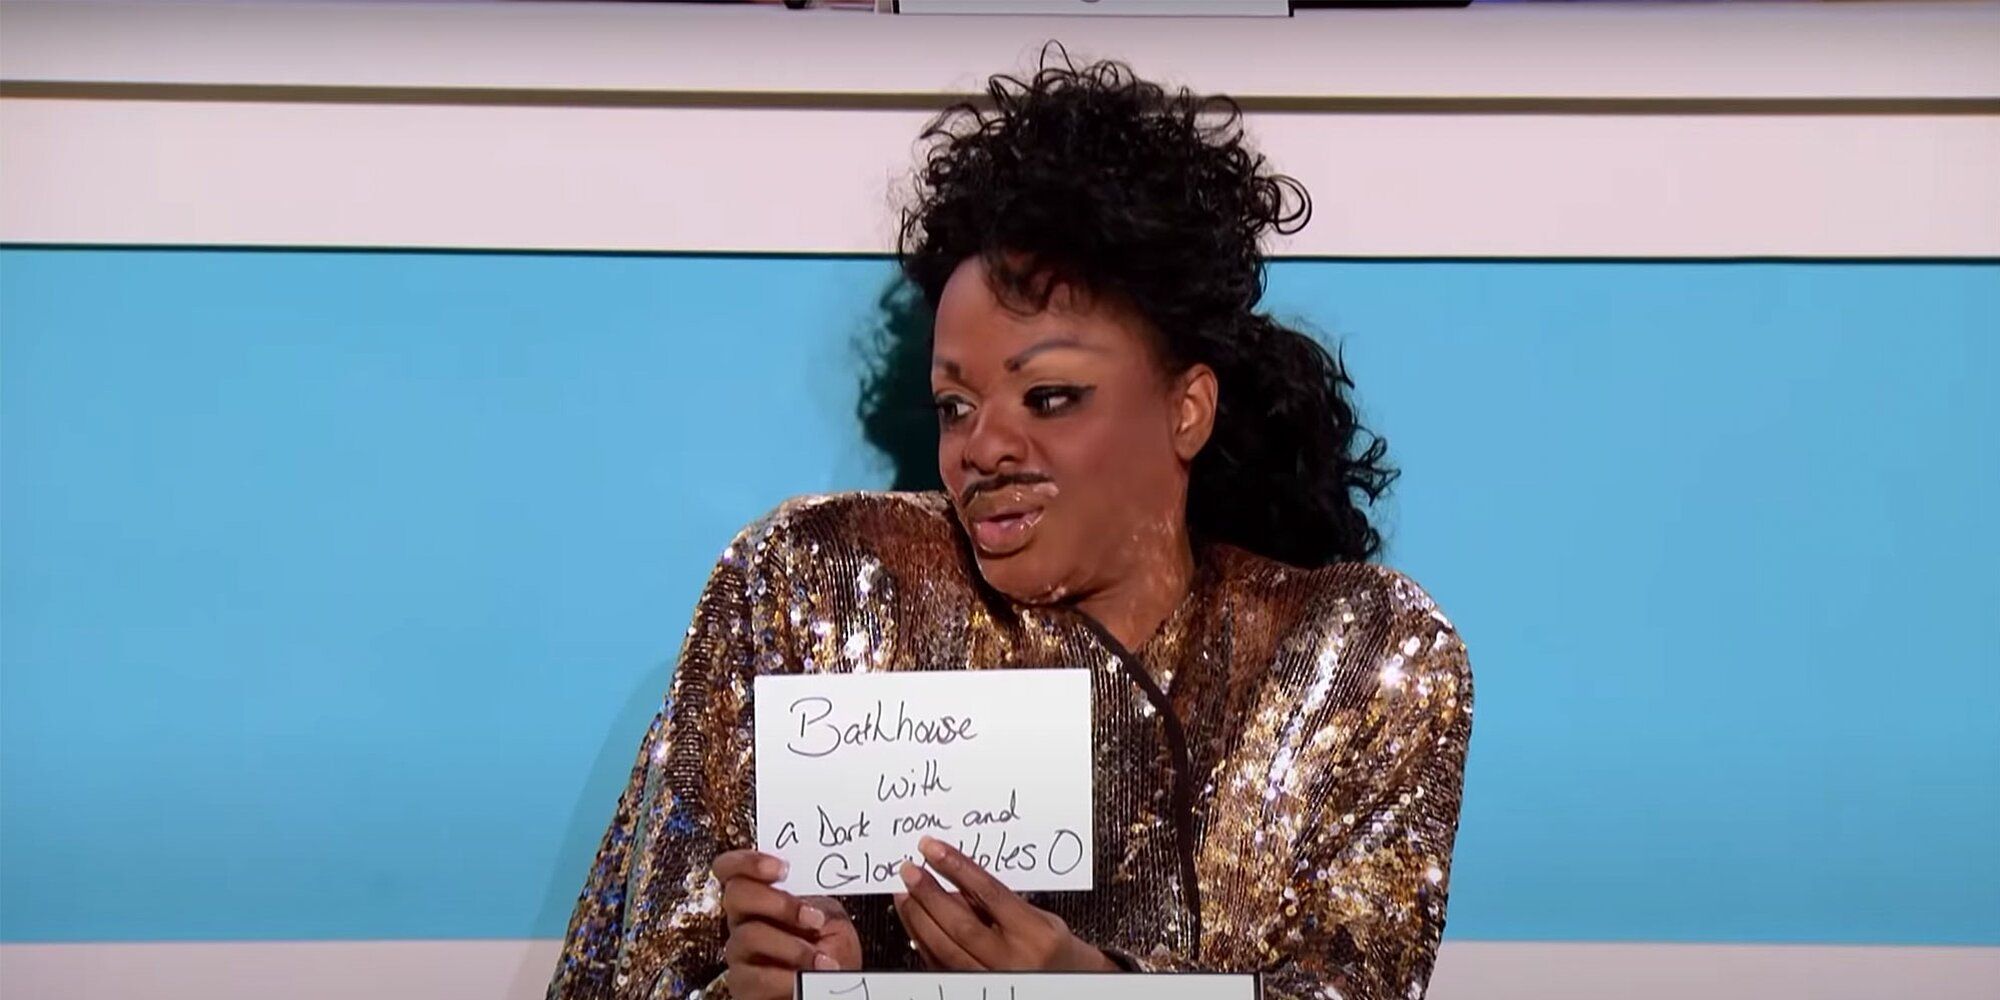 Drag queen Kennedy Davenport portrays Little Richard during the Snatch Game on RuPaul's Drag Race